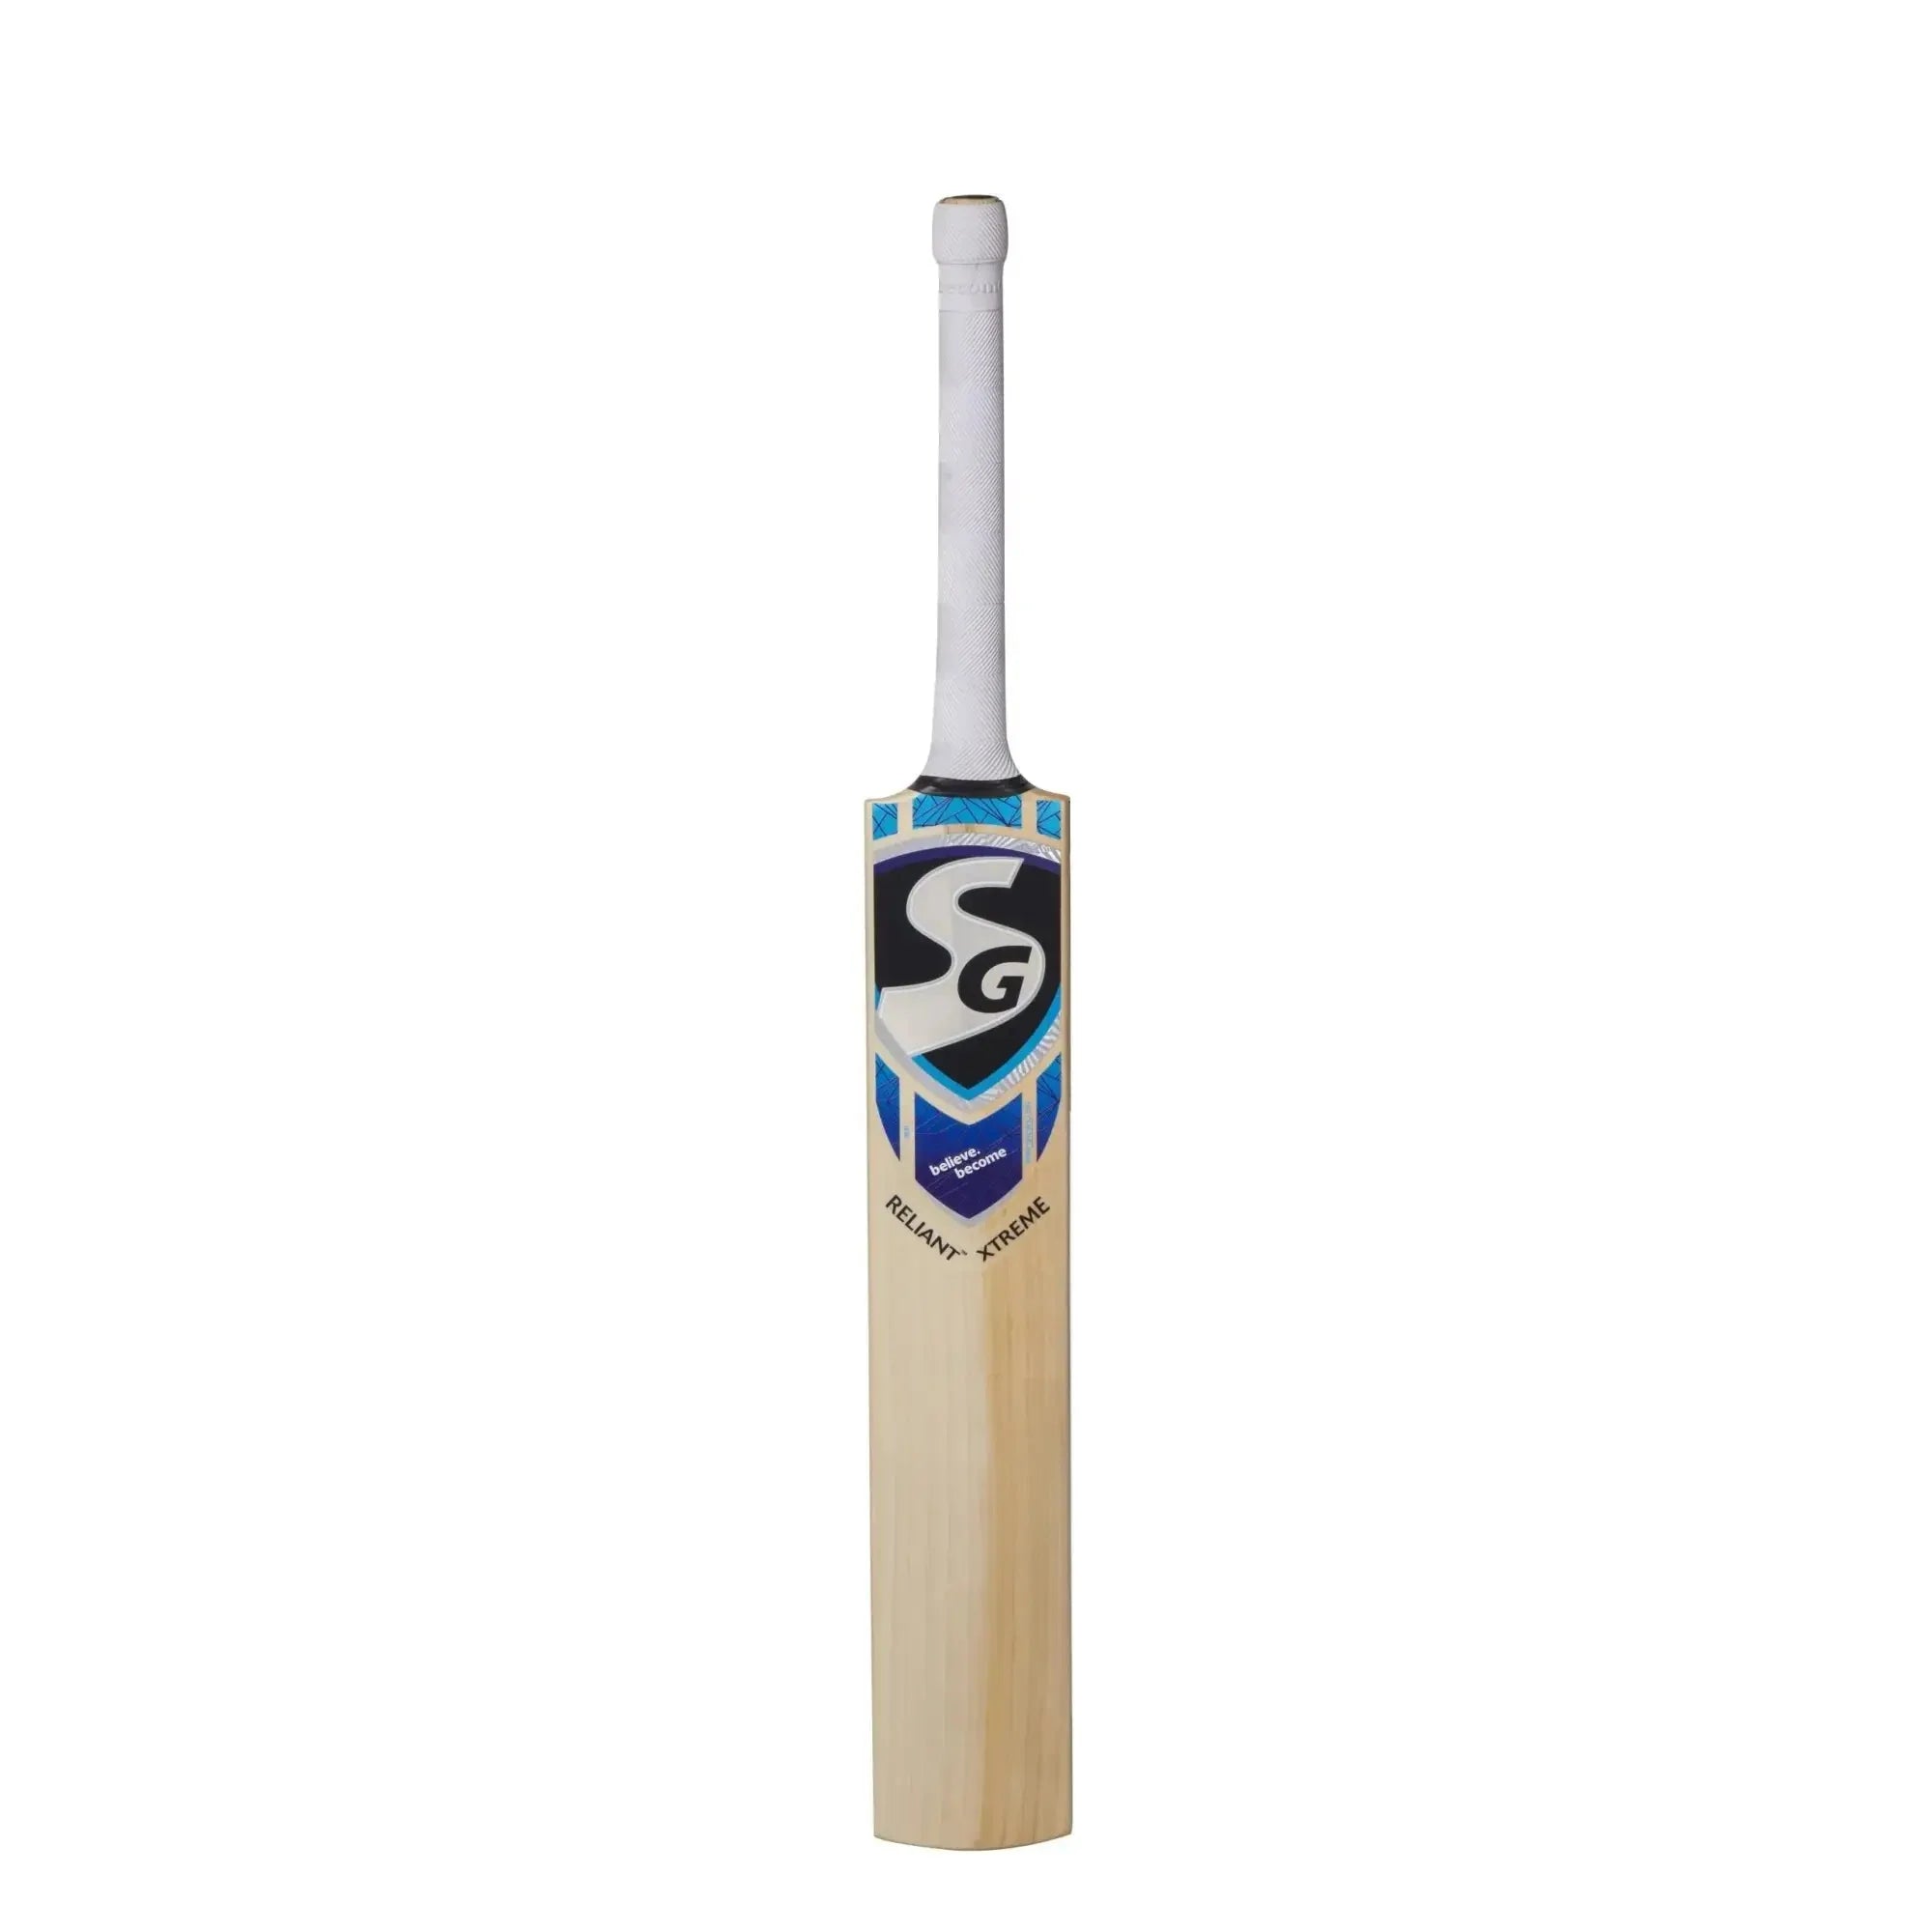 SG Reliant Xtreme Grade 5 English willow hard pressed & traditionally shaped for superb stroke Cricket Bat (Leather Ball) - Short Handle - 